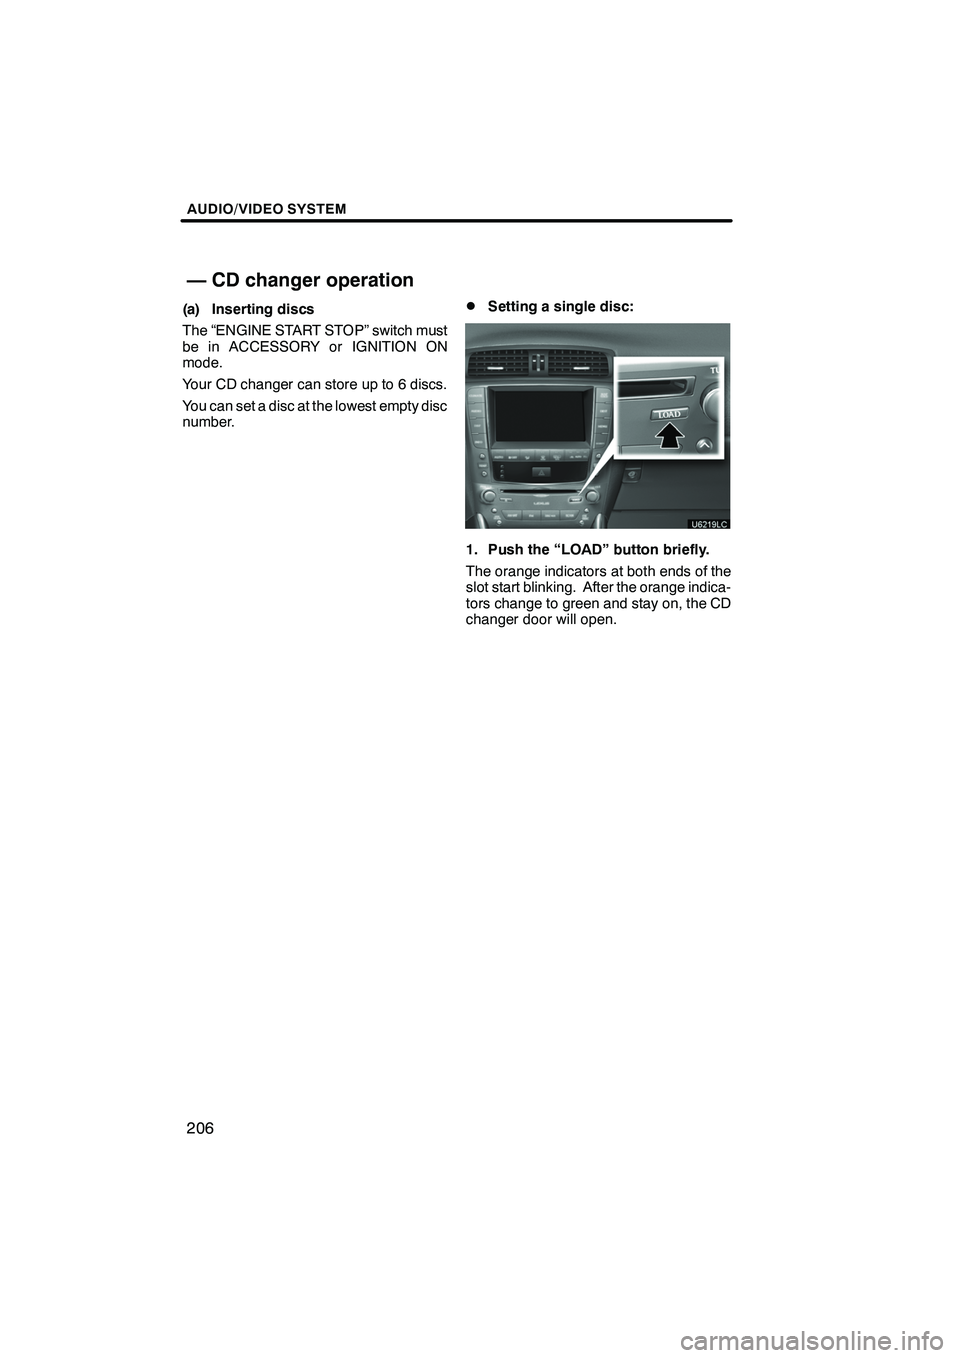 Lexus IS250 2012  Navigation Manual AUDIO/VIDEO SYSTEM
206
(a) Inserting discs
The “ENGINE START STOP” switch must
be in ACCESSORY or IGNITION ON
mode.
Your CD changer can store up to 6 discs.
You can set a disc at the lowest empty 